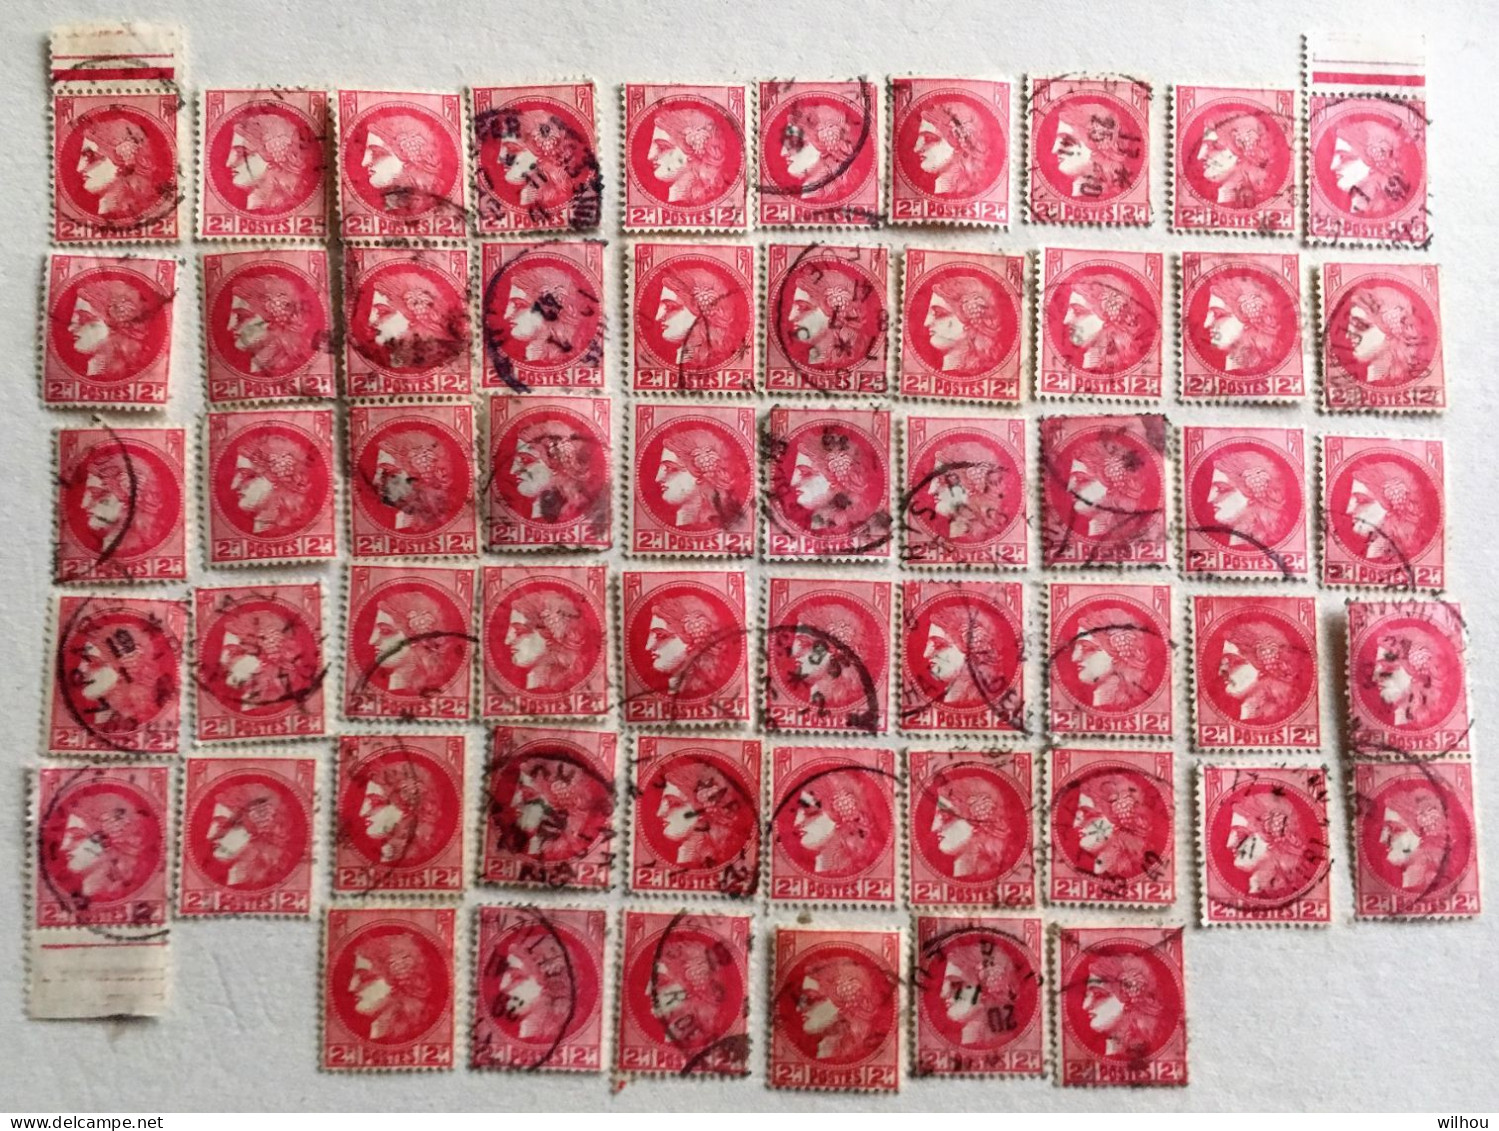 LOT DE 56 TIMBRES OBLITERES TYPE CERES A 2 F ROSE ROUGE   N°373 YT - 1945-47 Ceres (Mazelin)